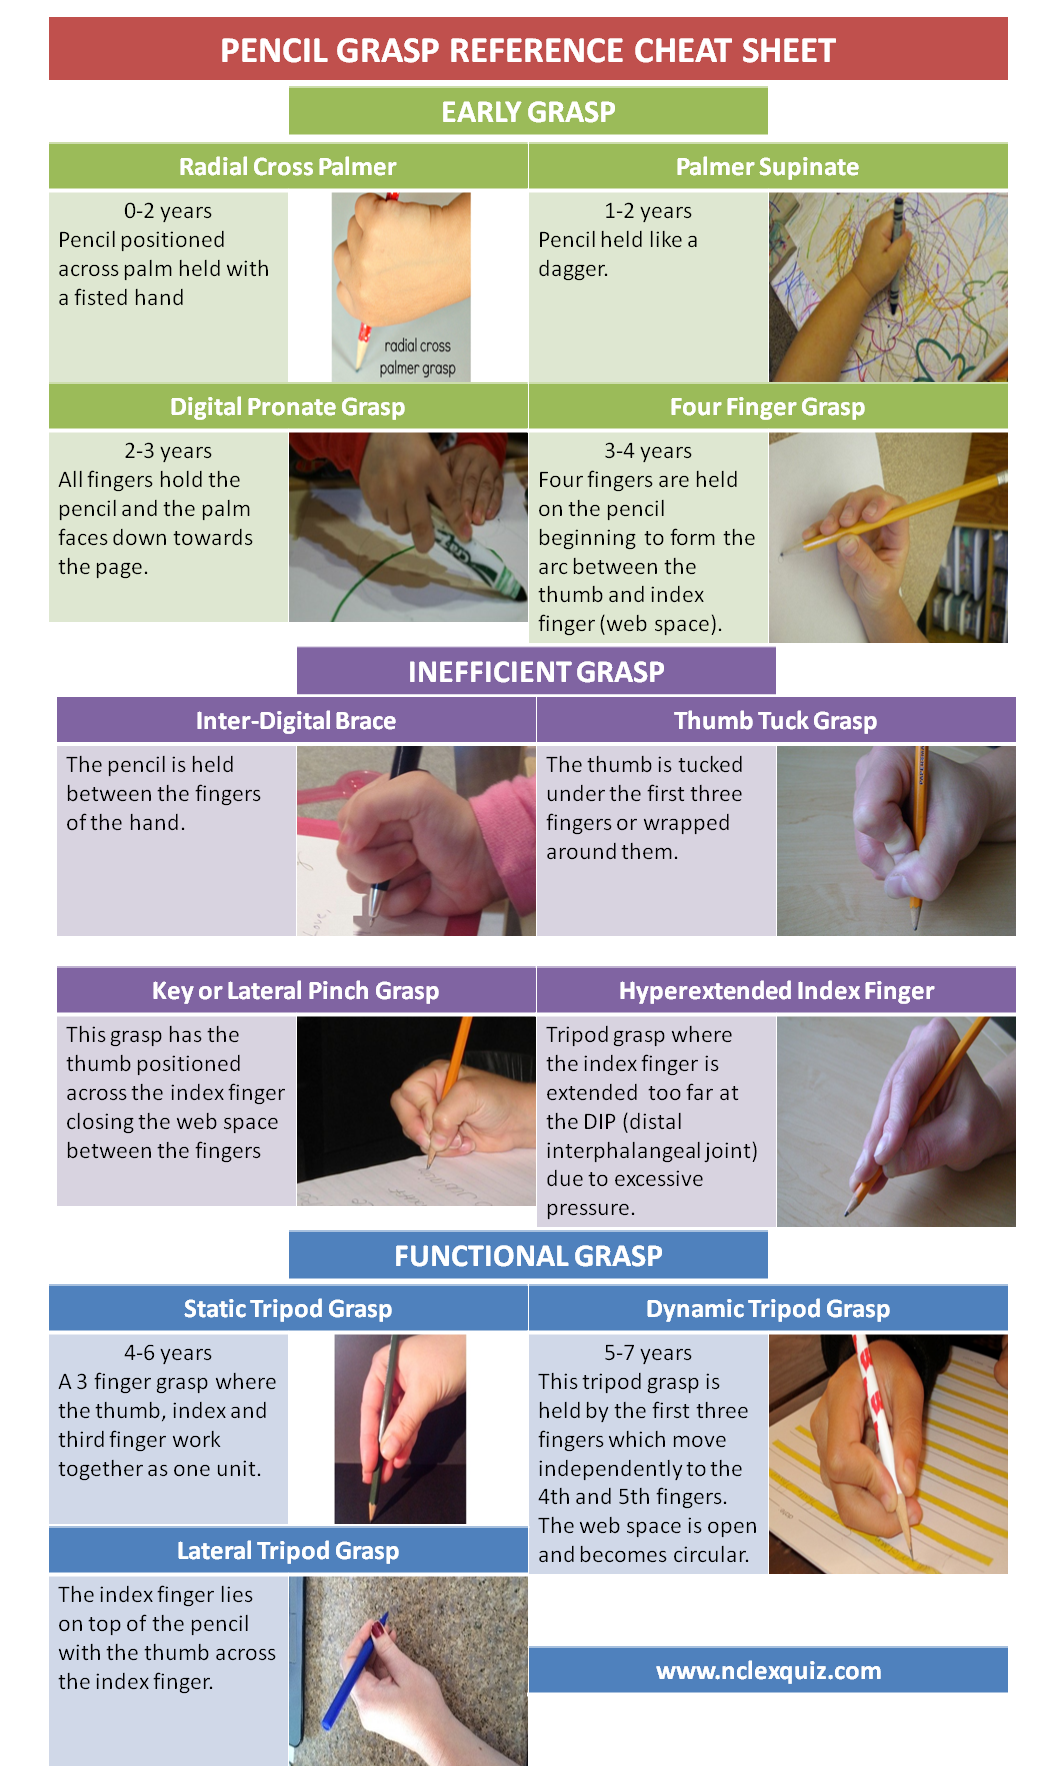 Pencil Grasp Reference Cheat Sheet